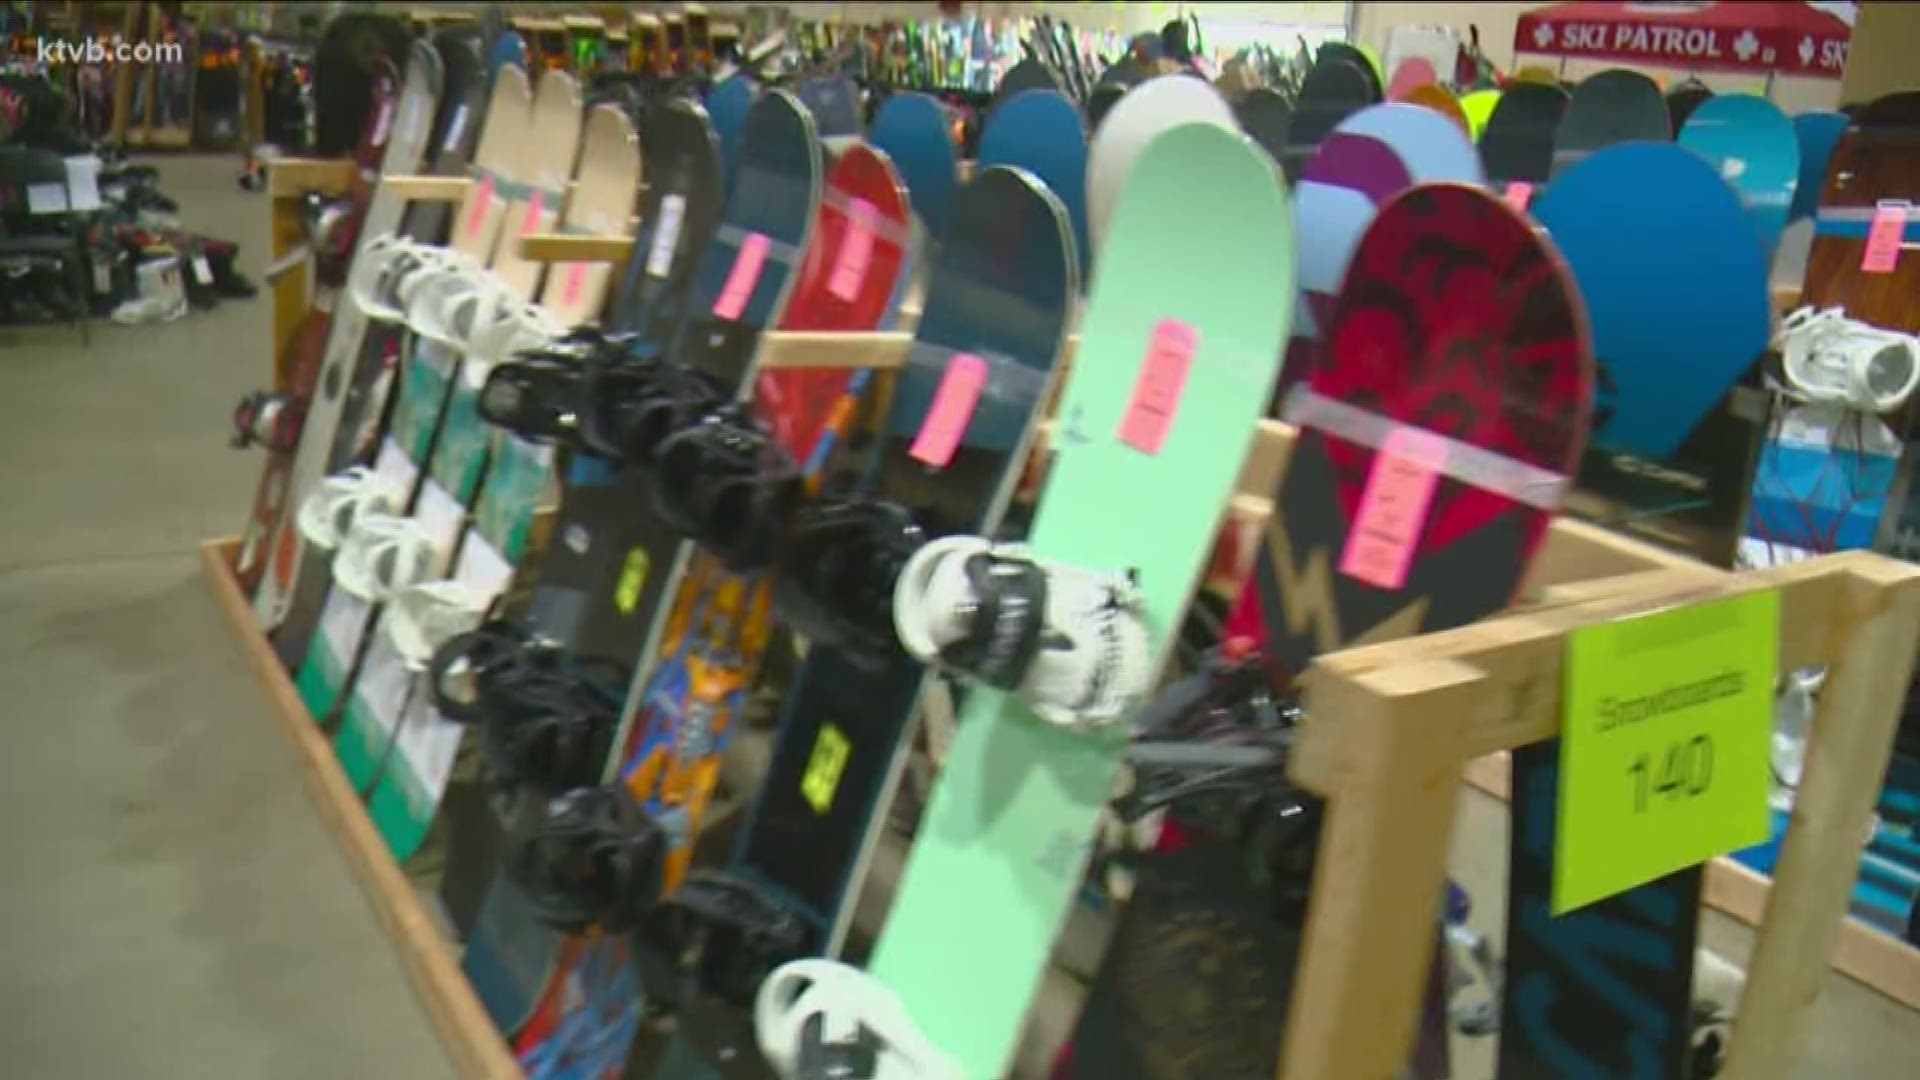 Skiers and snowboarders are searching for bargains this weekend at the 69th annual ski swap in Boise.